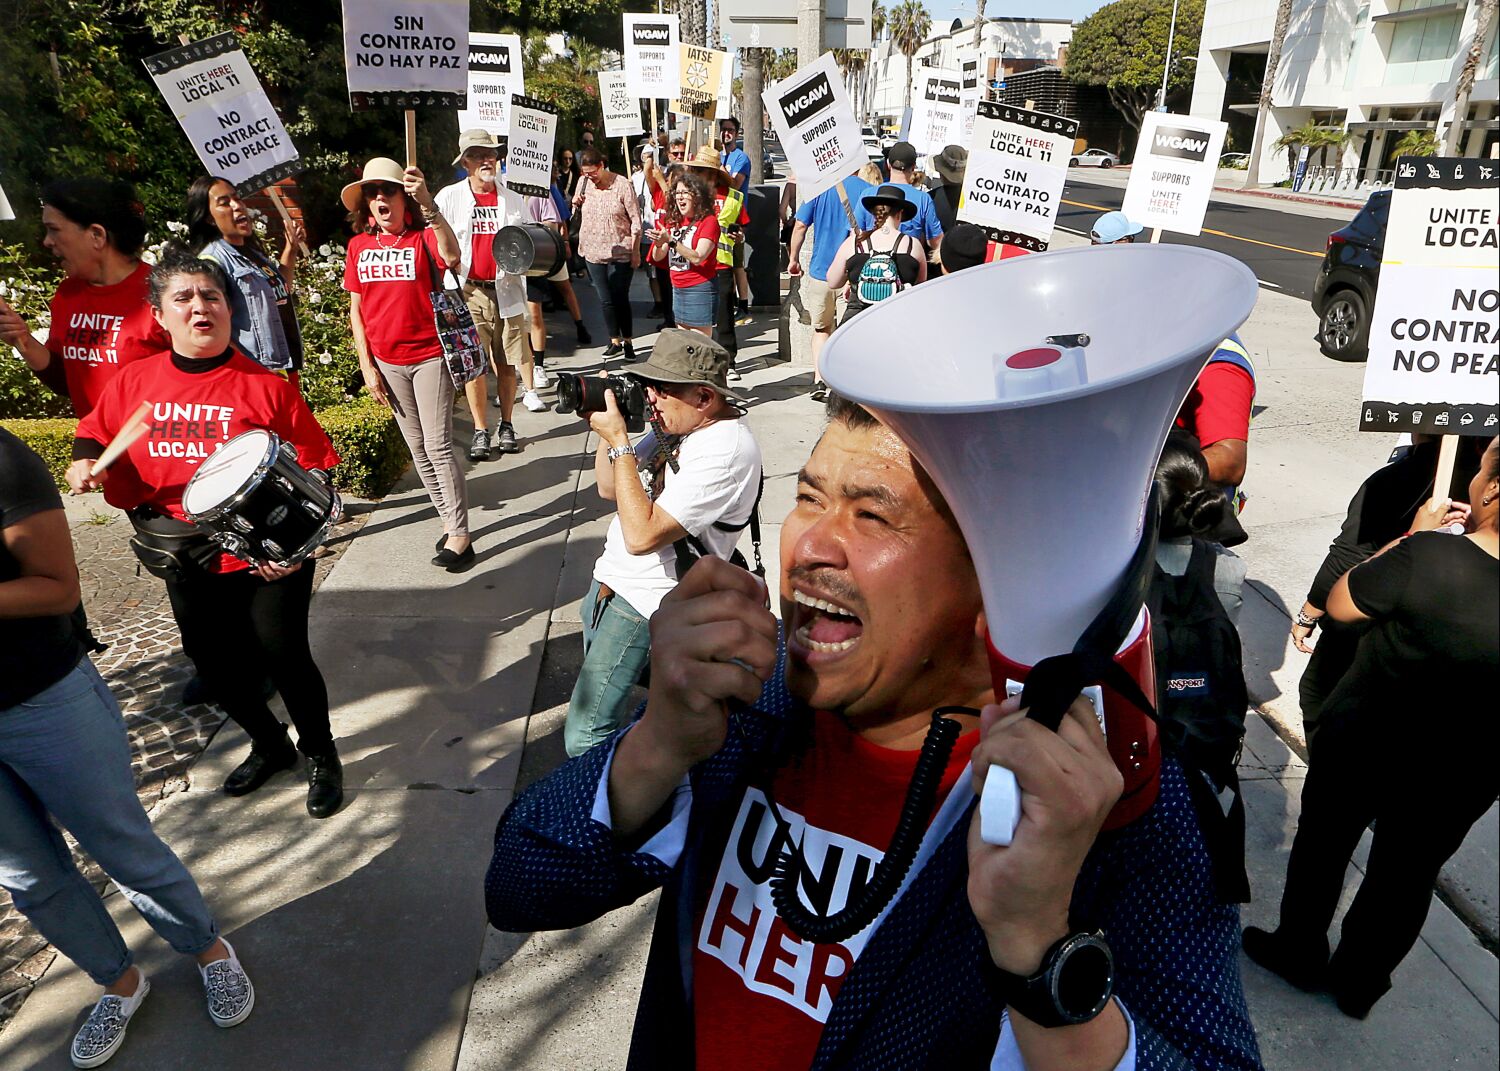 Column: On the picket line, a telling alliance between hotel workers and screenwriters